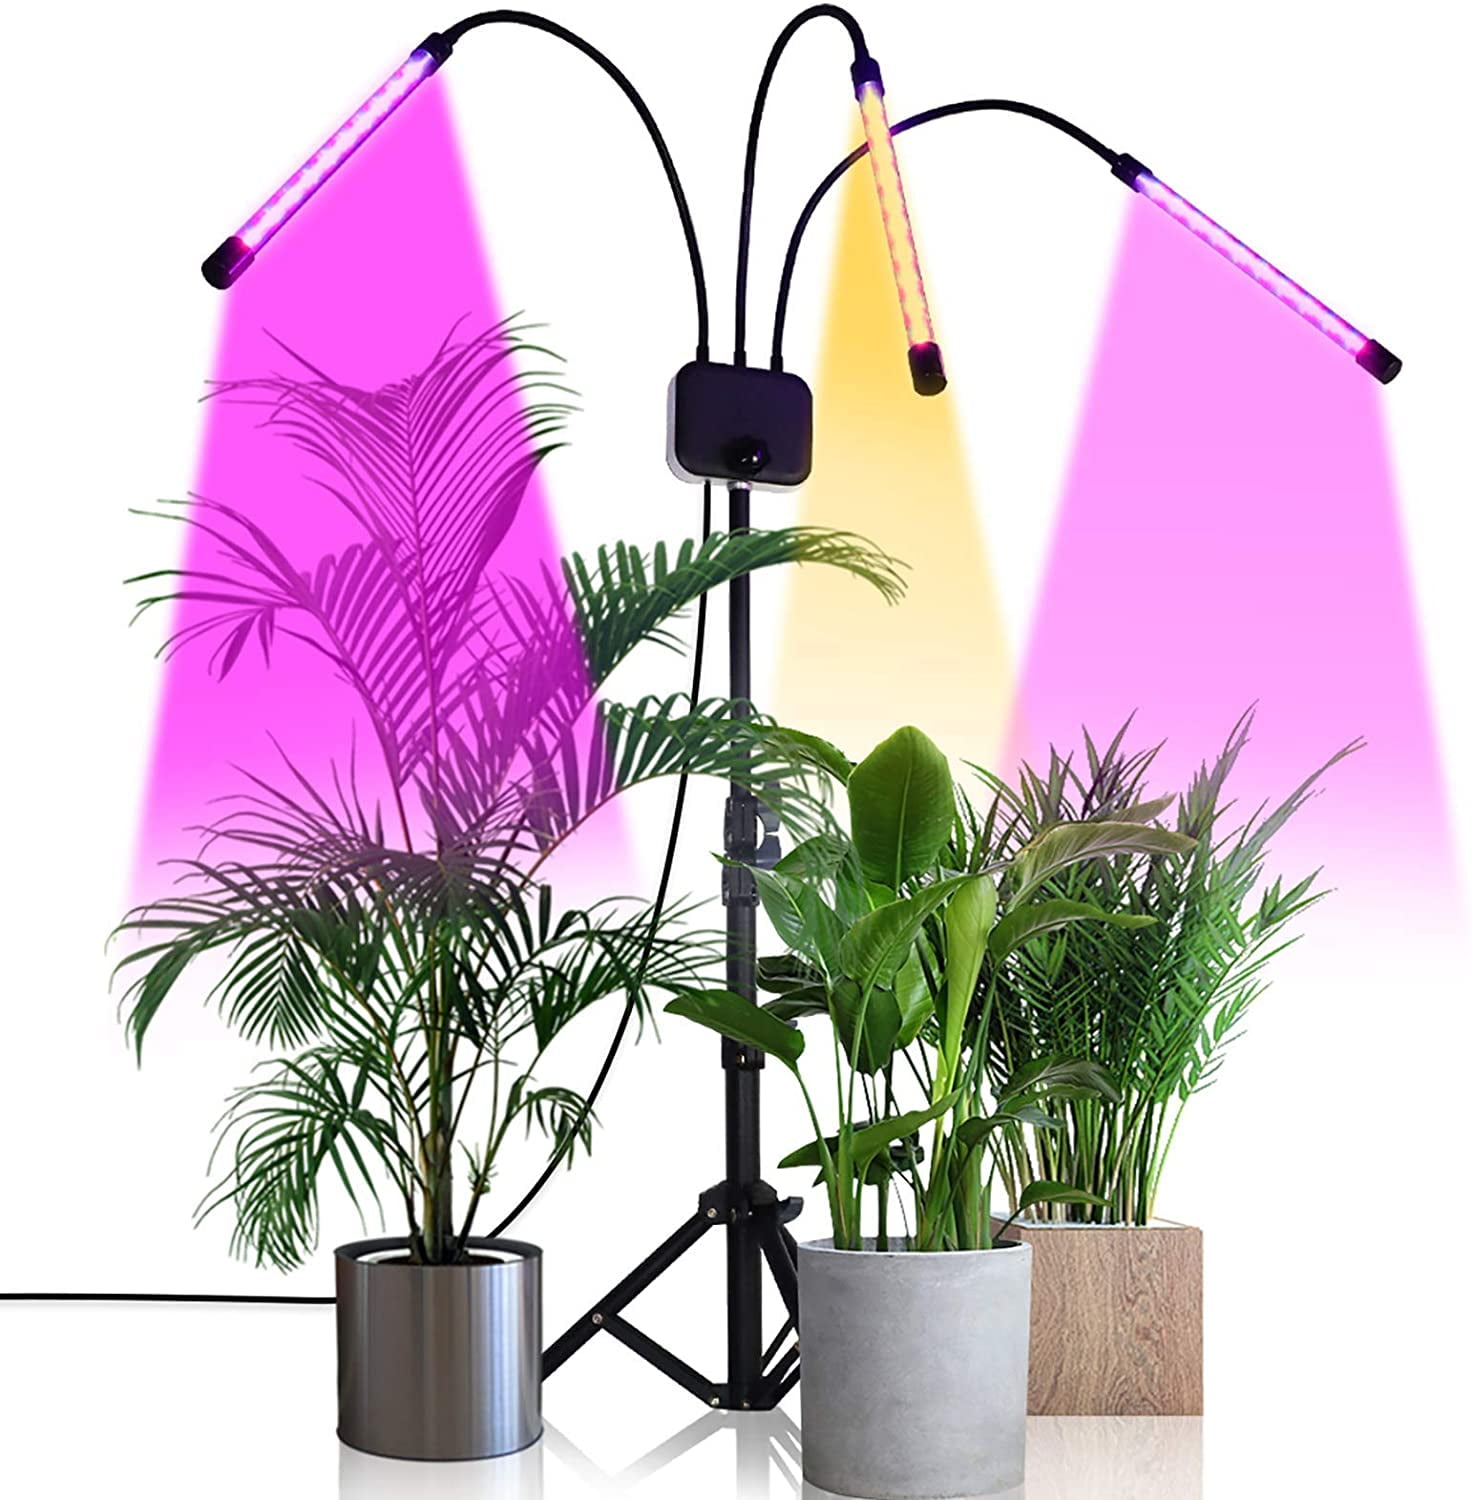 Grow Light with Stand Tri-Head LED Grow Lights for Indoor Plants Full Spectrum 